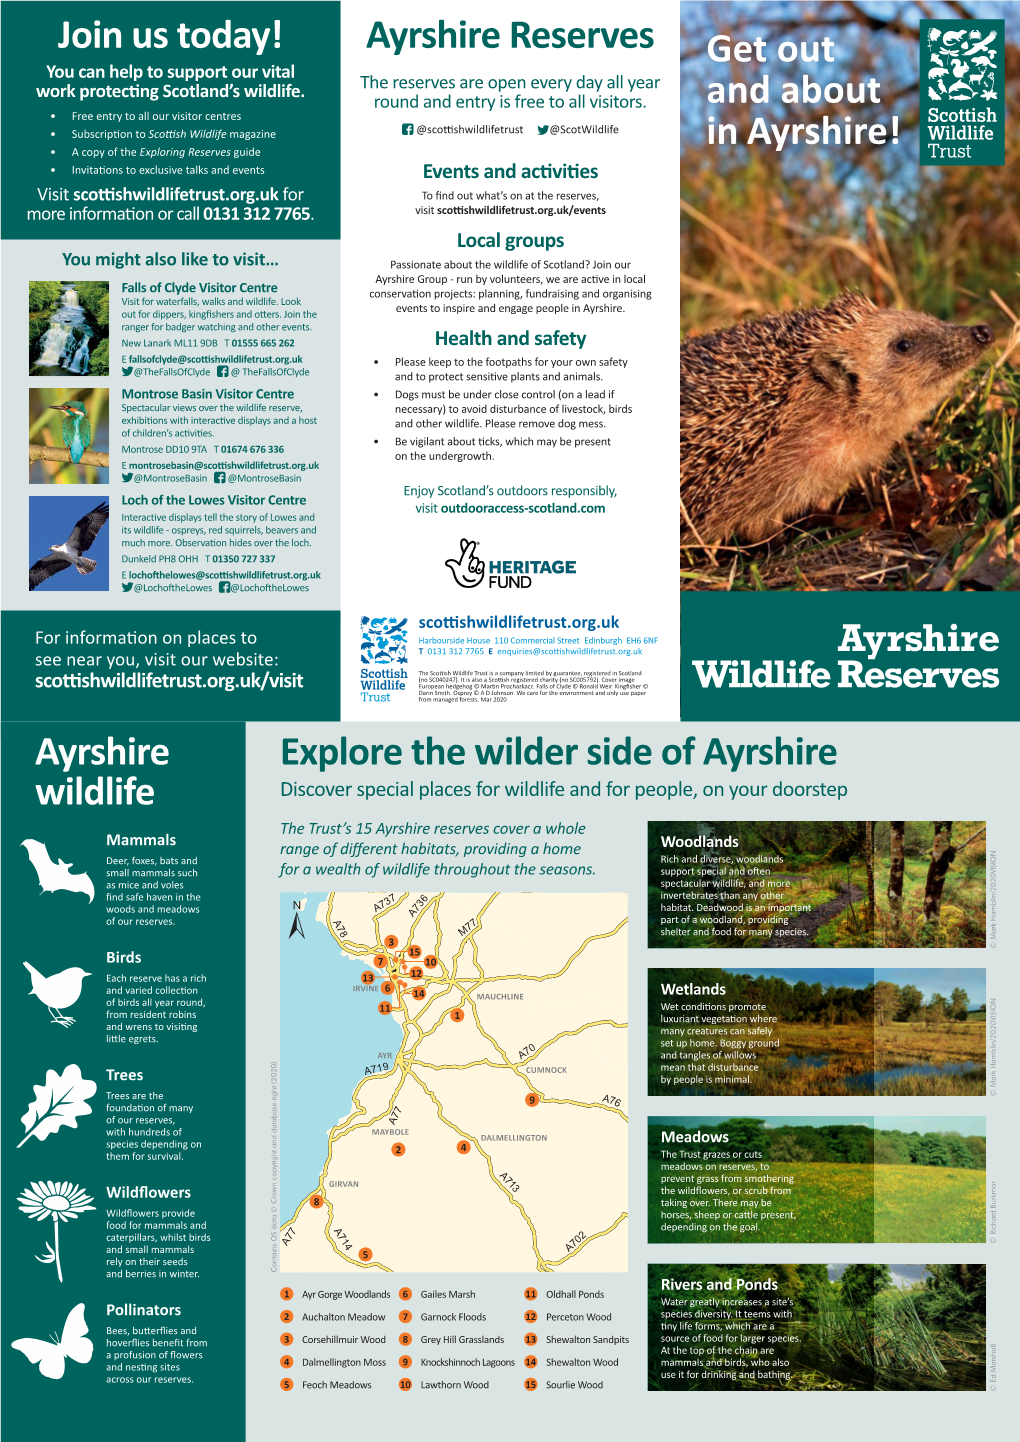 Ayrshire Reserves You Can Help to Support Our Vital Get out Work Protecting Scotland’S Wildlife